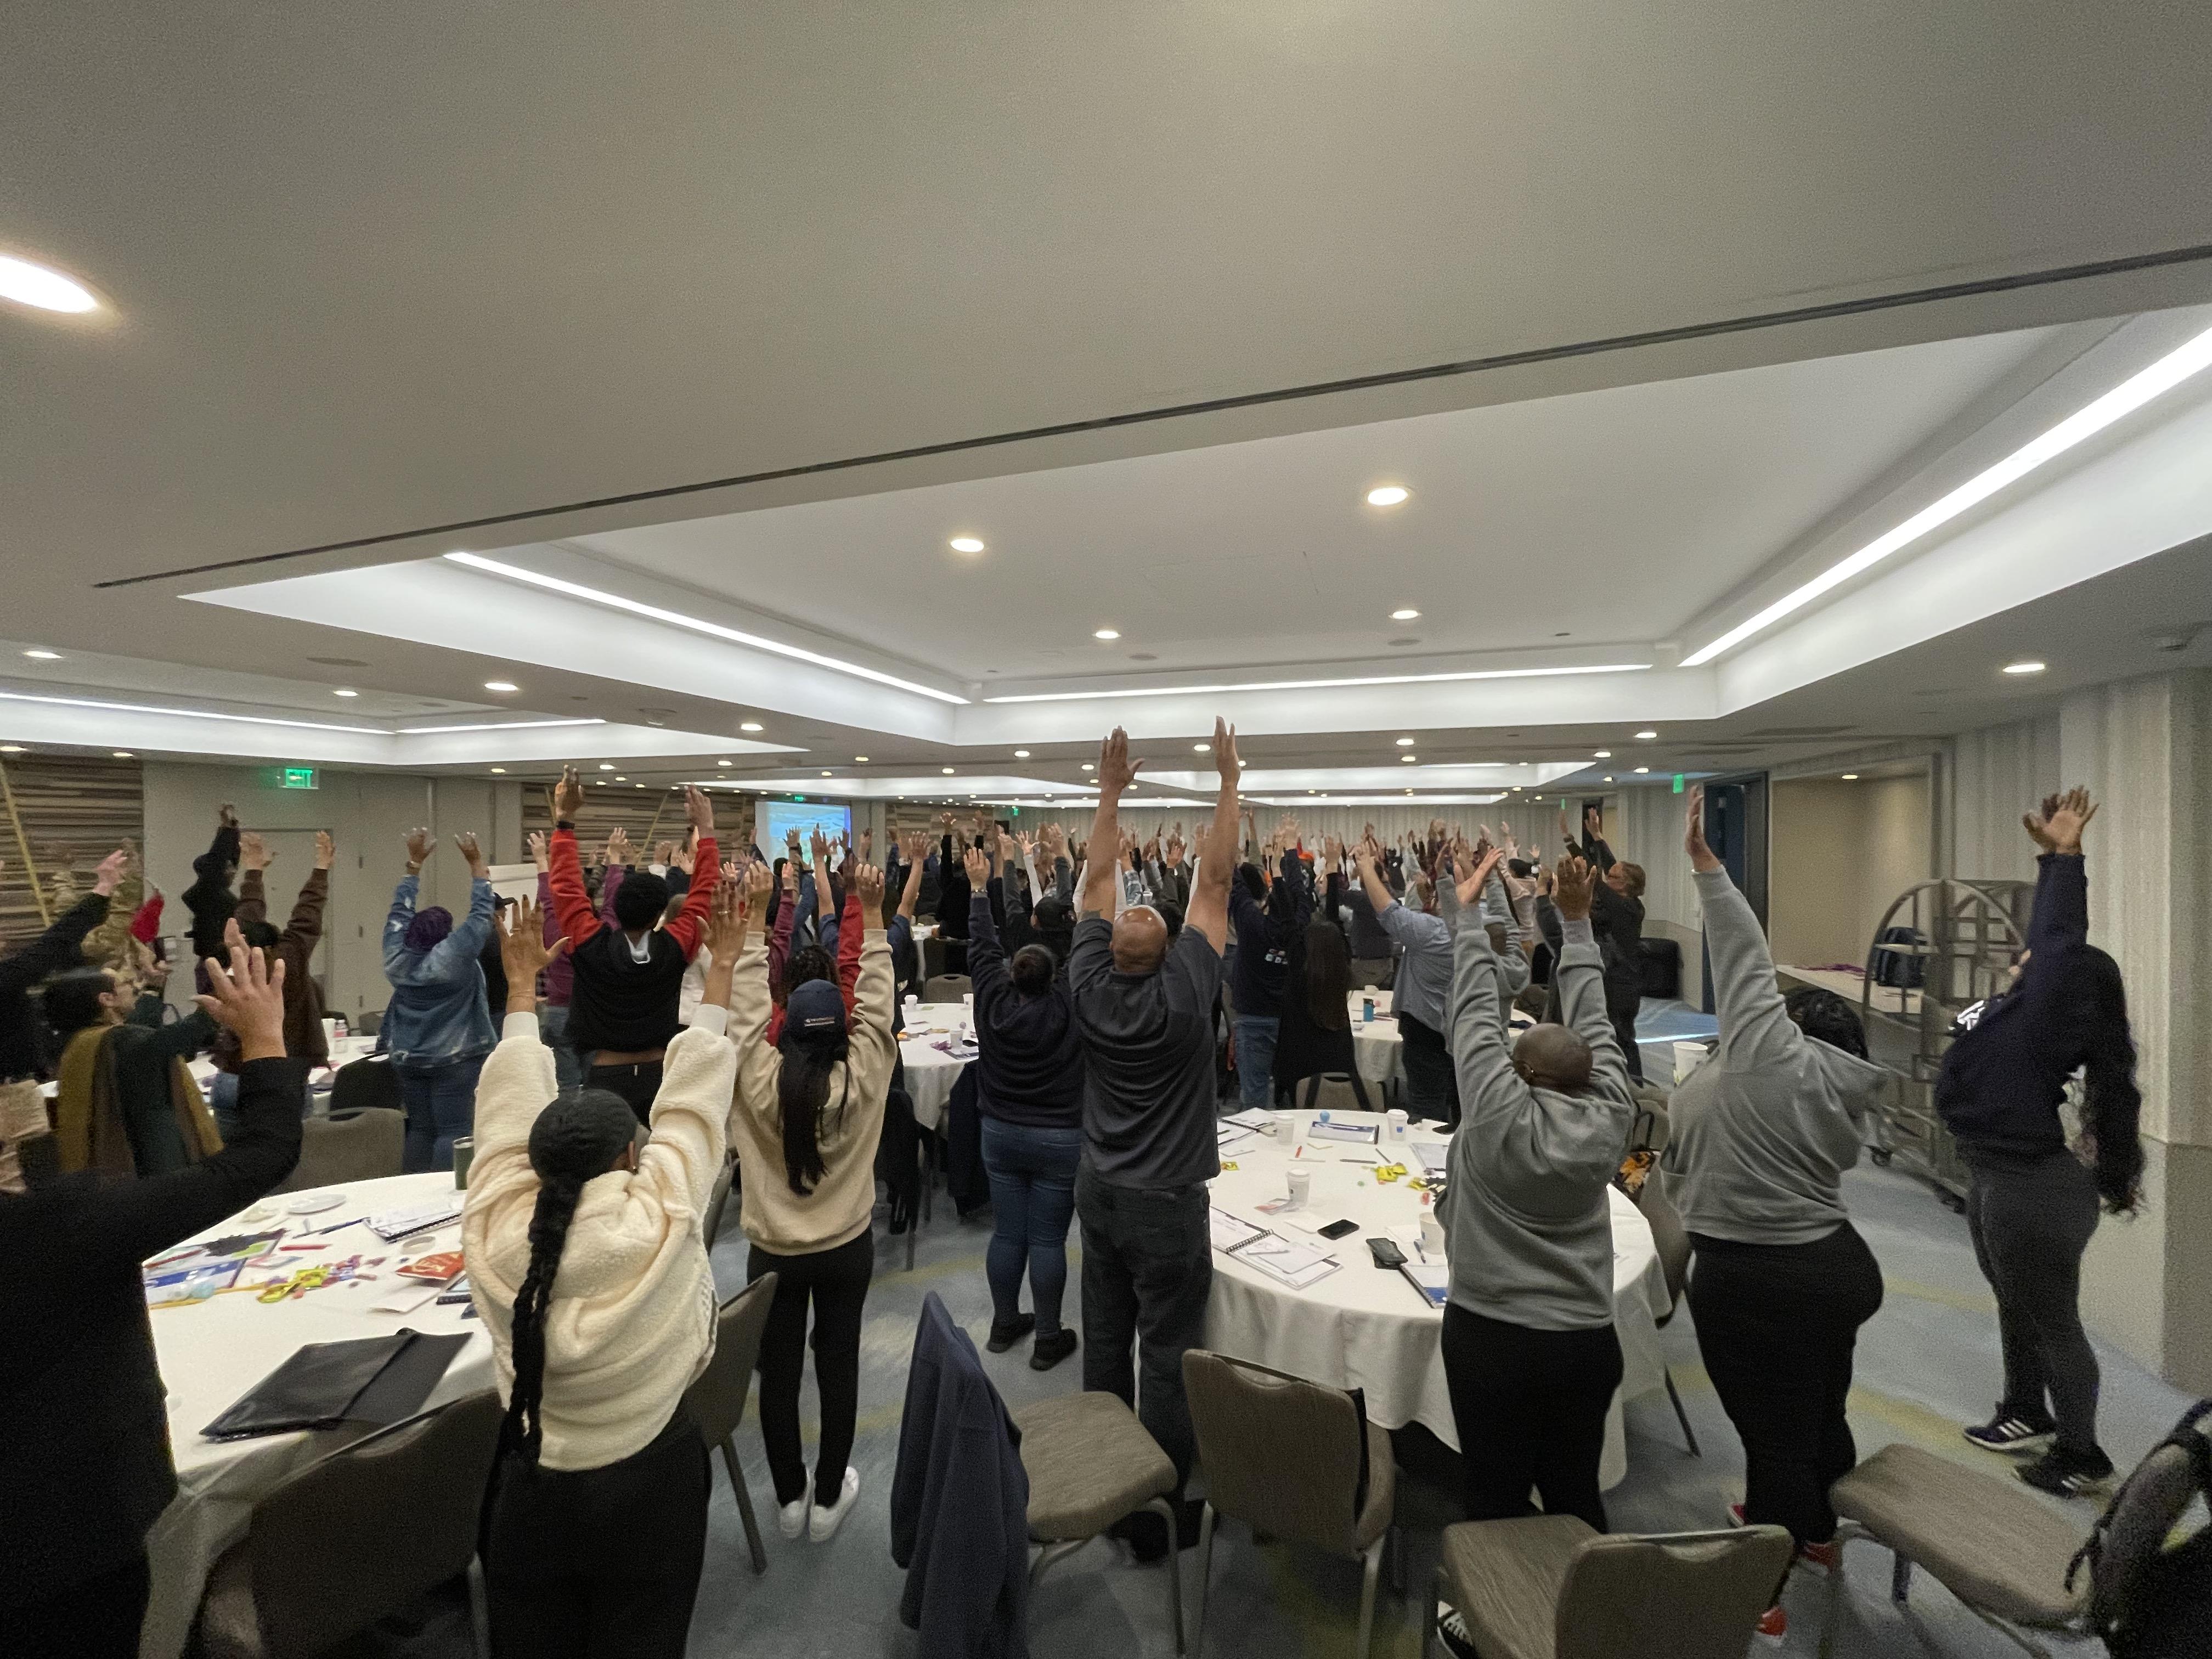 all staff with their hands up for a "Bar of Expectations" exercise